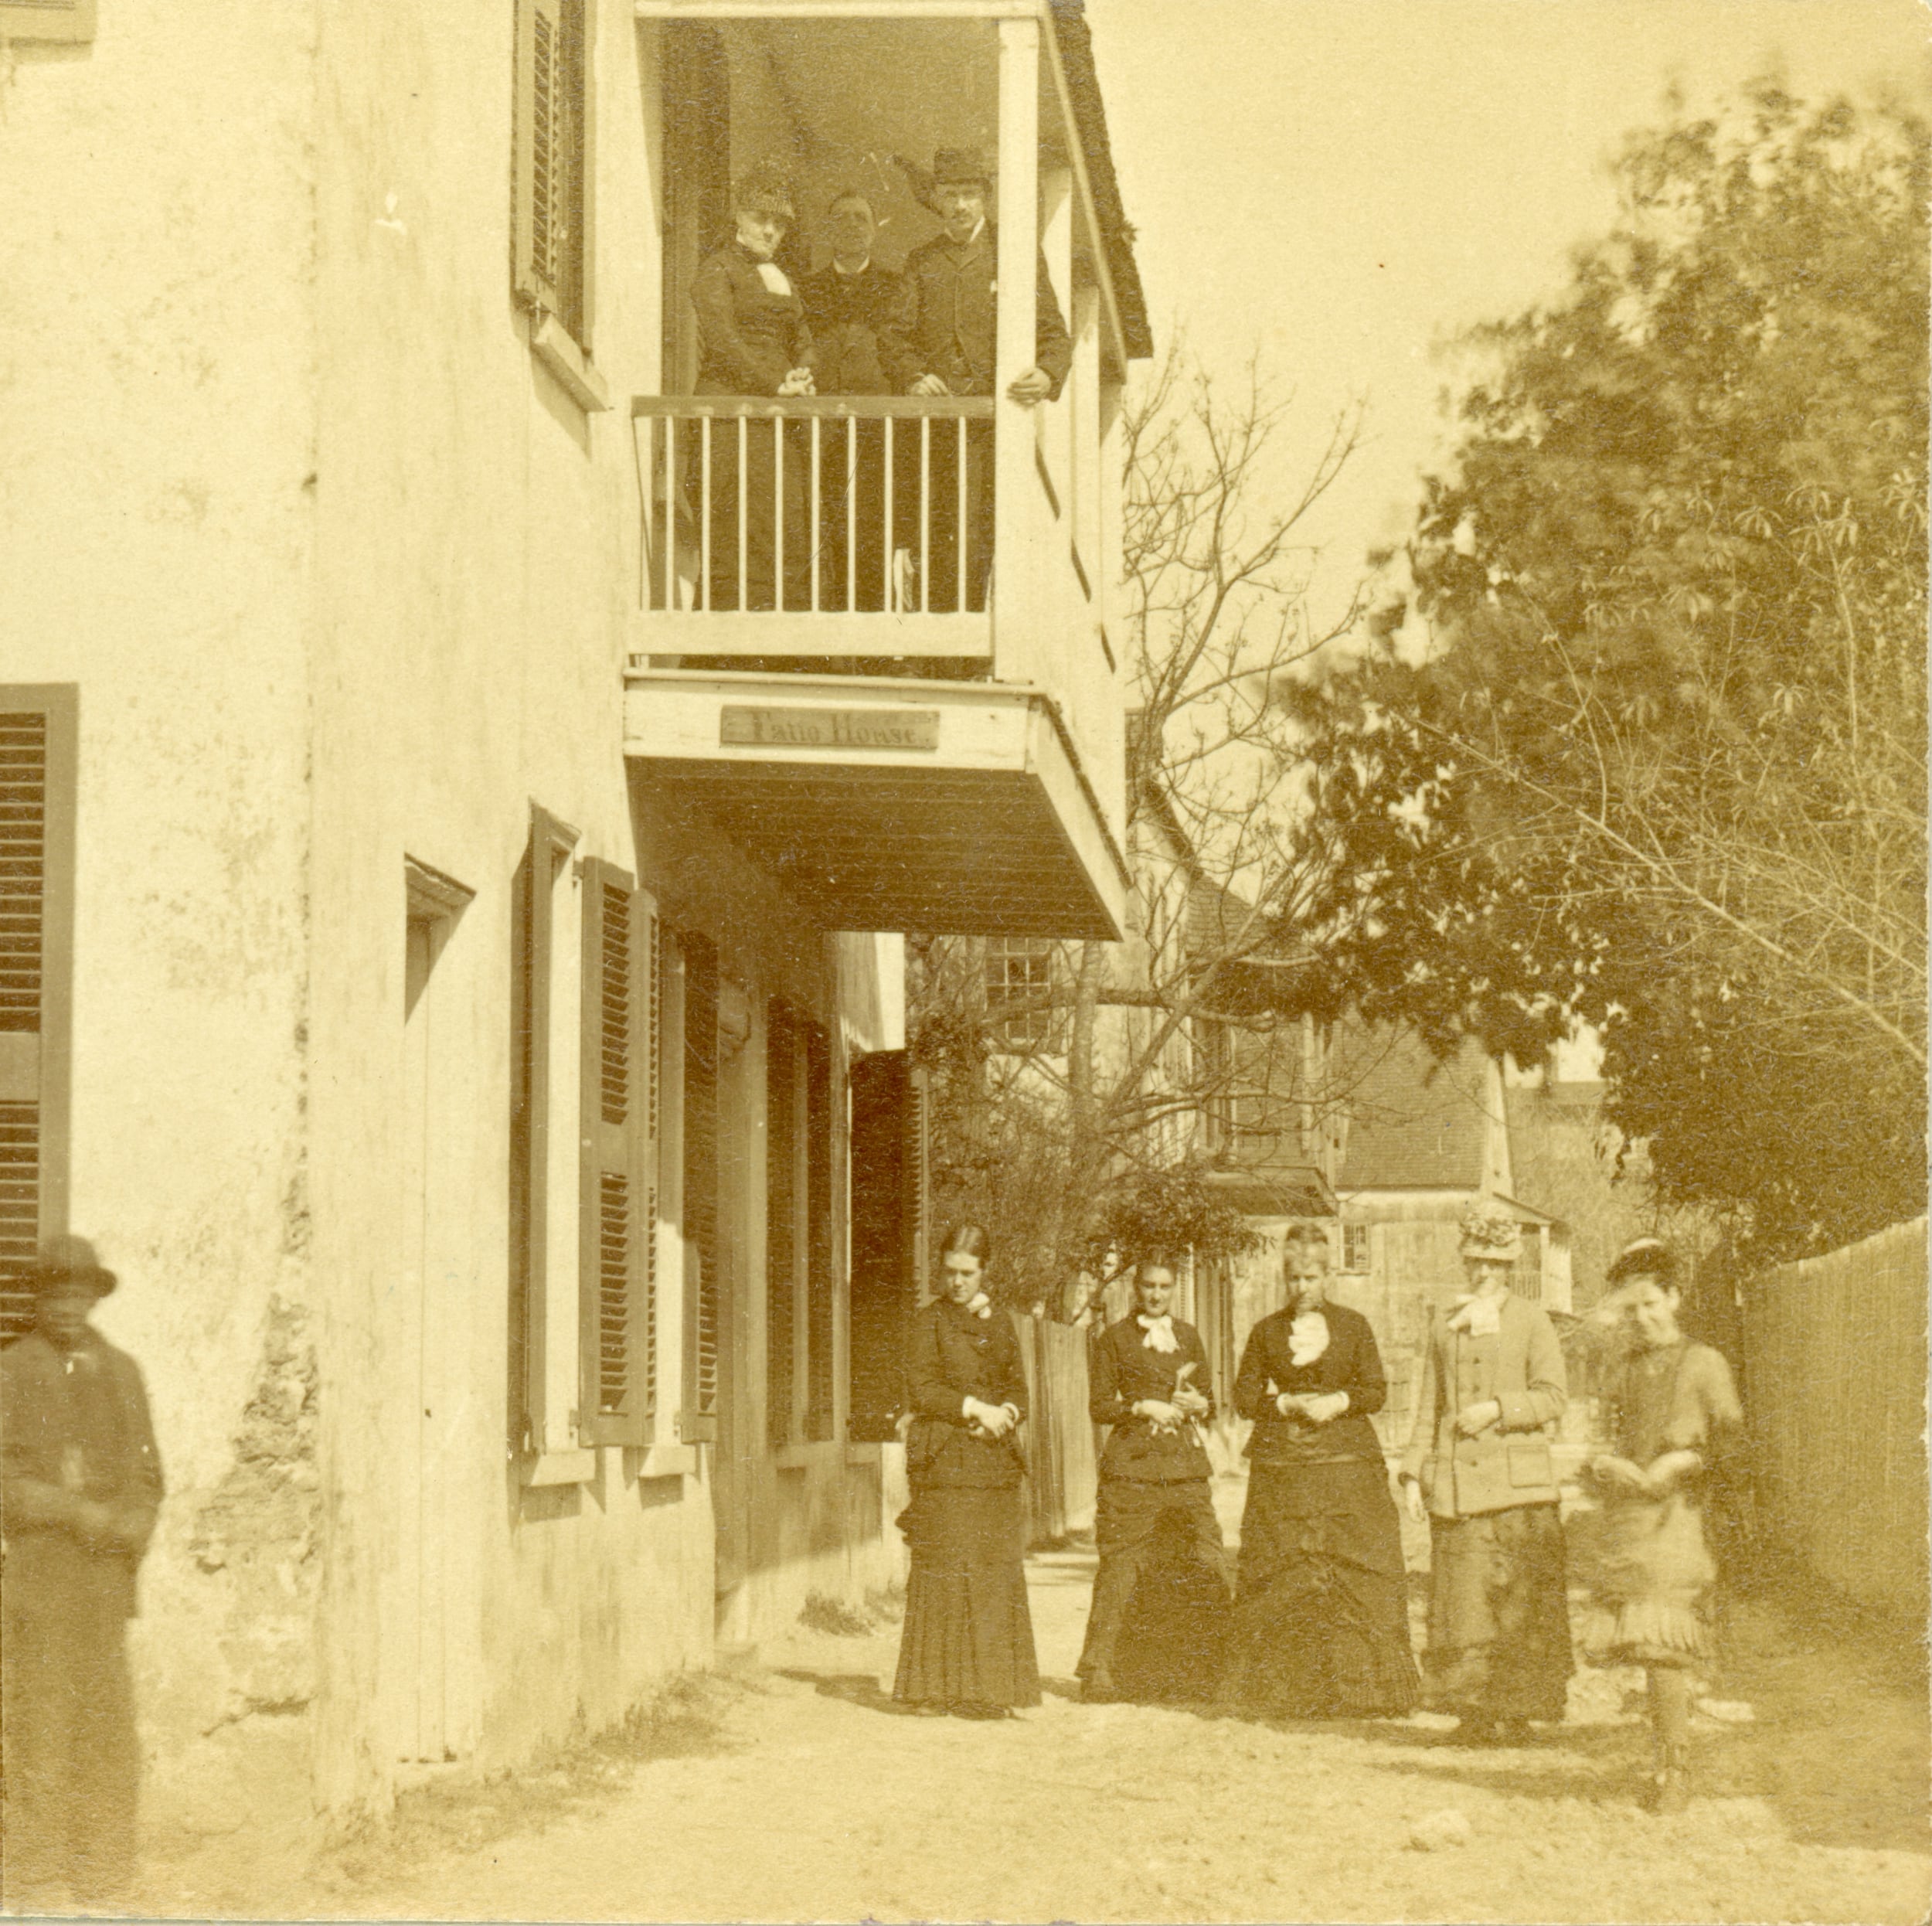 A historical image of the Ximenez-Fatio House in the 1880s, with white guests in the street and on the balcony, and a young black man at the corner of the house